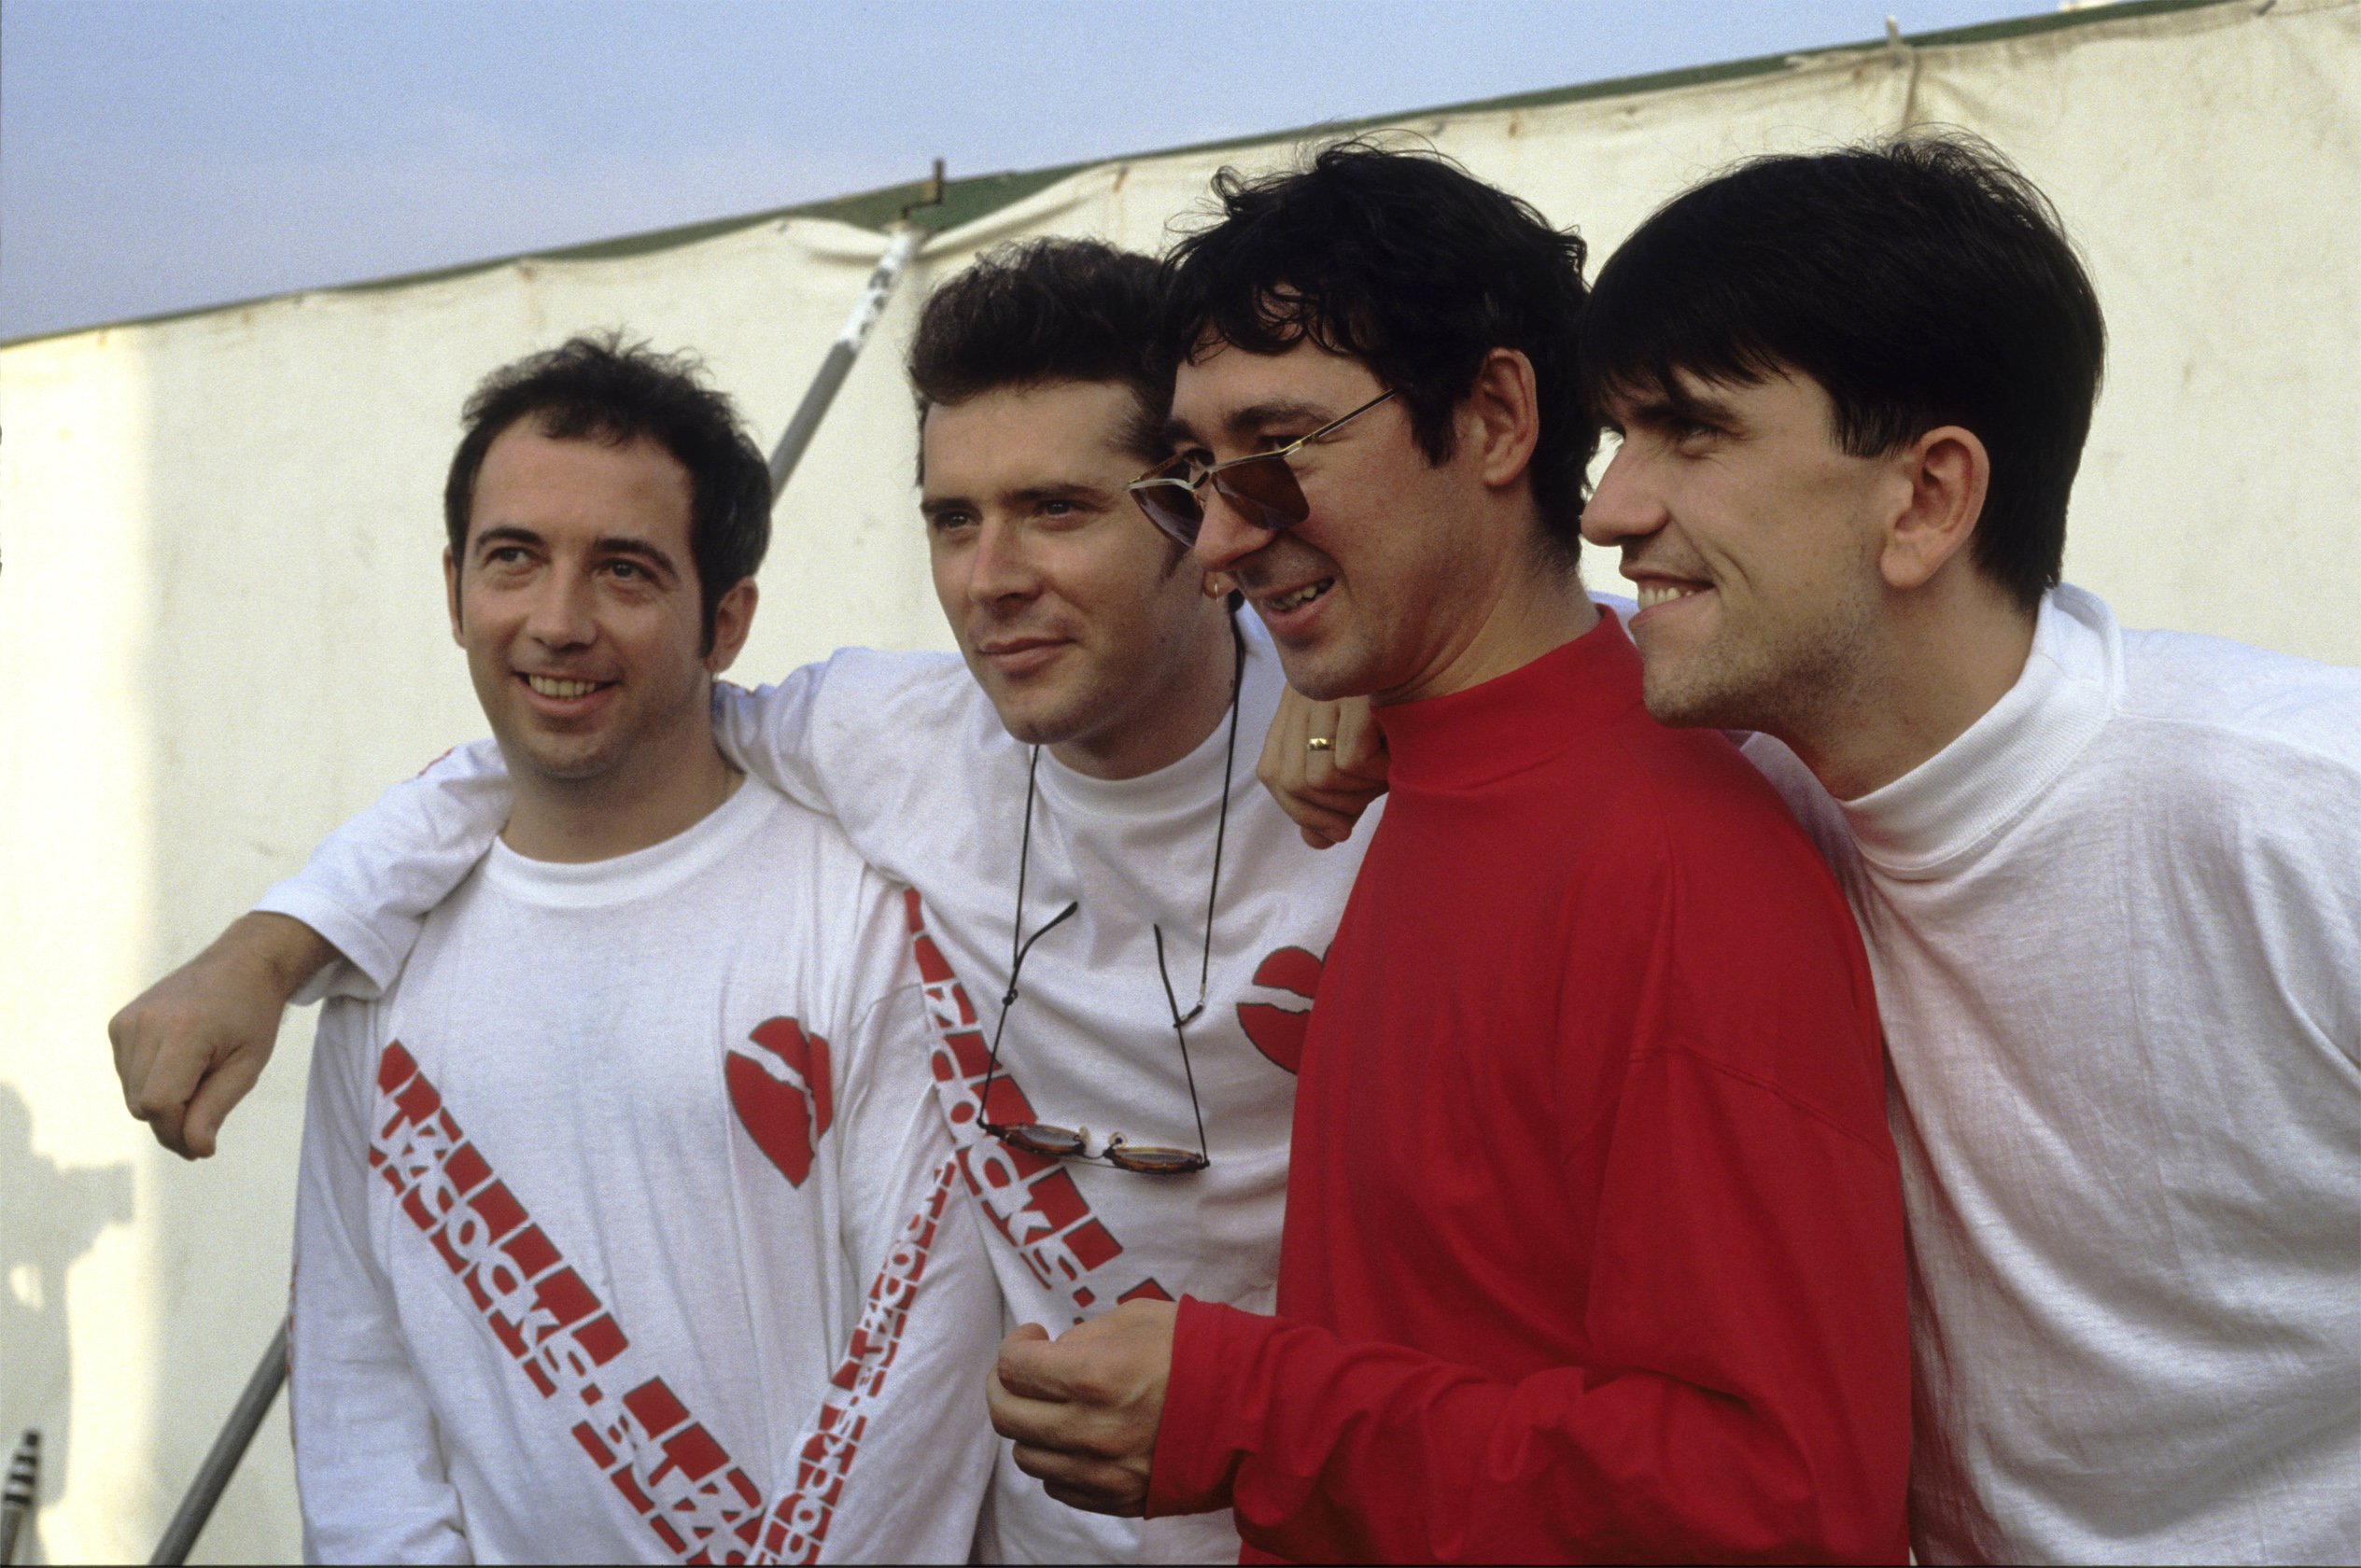 The re-formed Buzzcocks line-up at the Reading Festival in 1990. From left: Pete Shelley, Steve Diggle, Steve Garvey and Mike Joyce